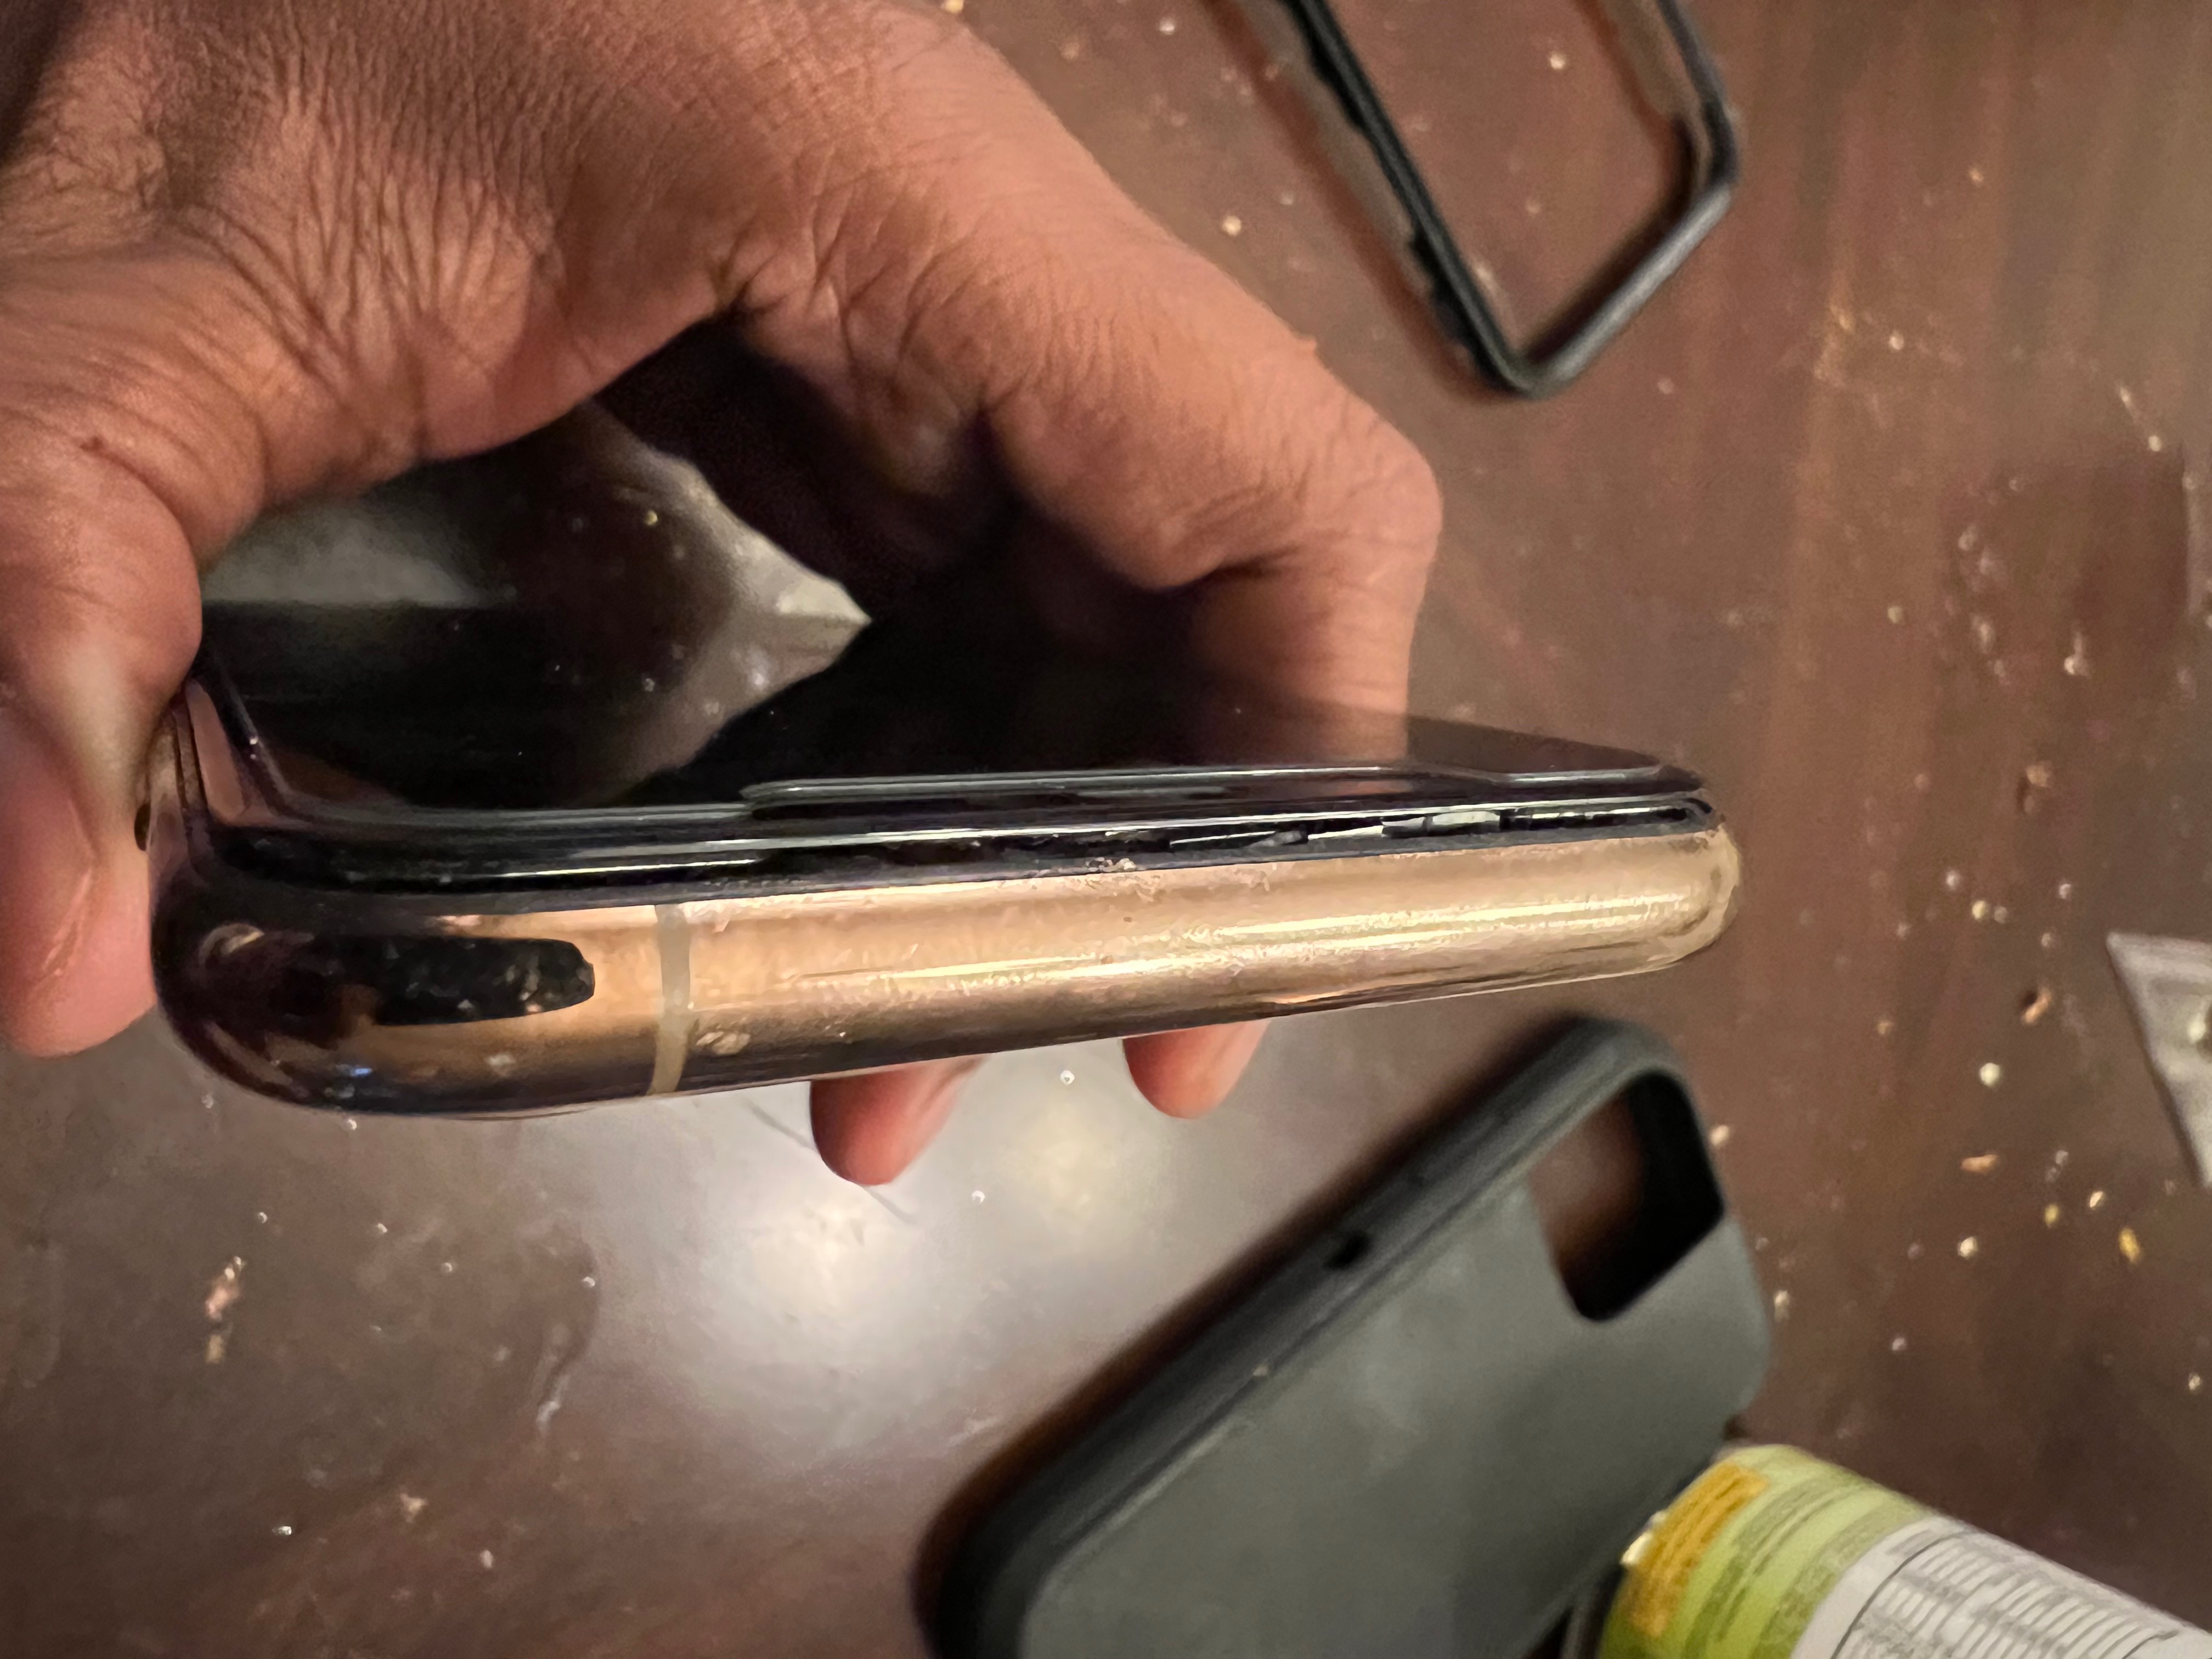 Portico eksegese Overgivelse Iphone 11pro screen popped out. - Apple Community